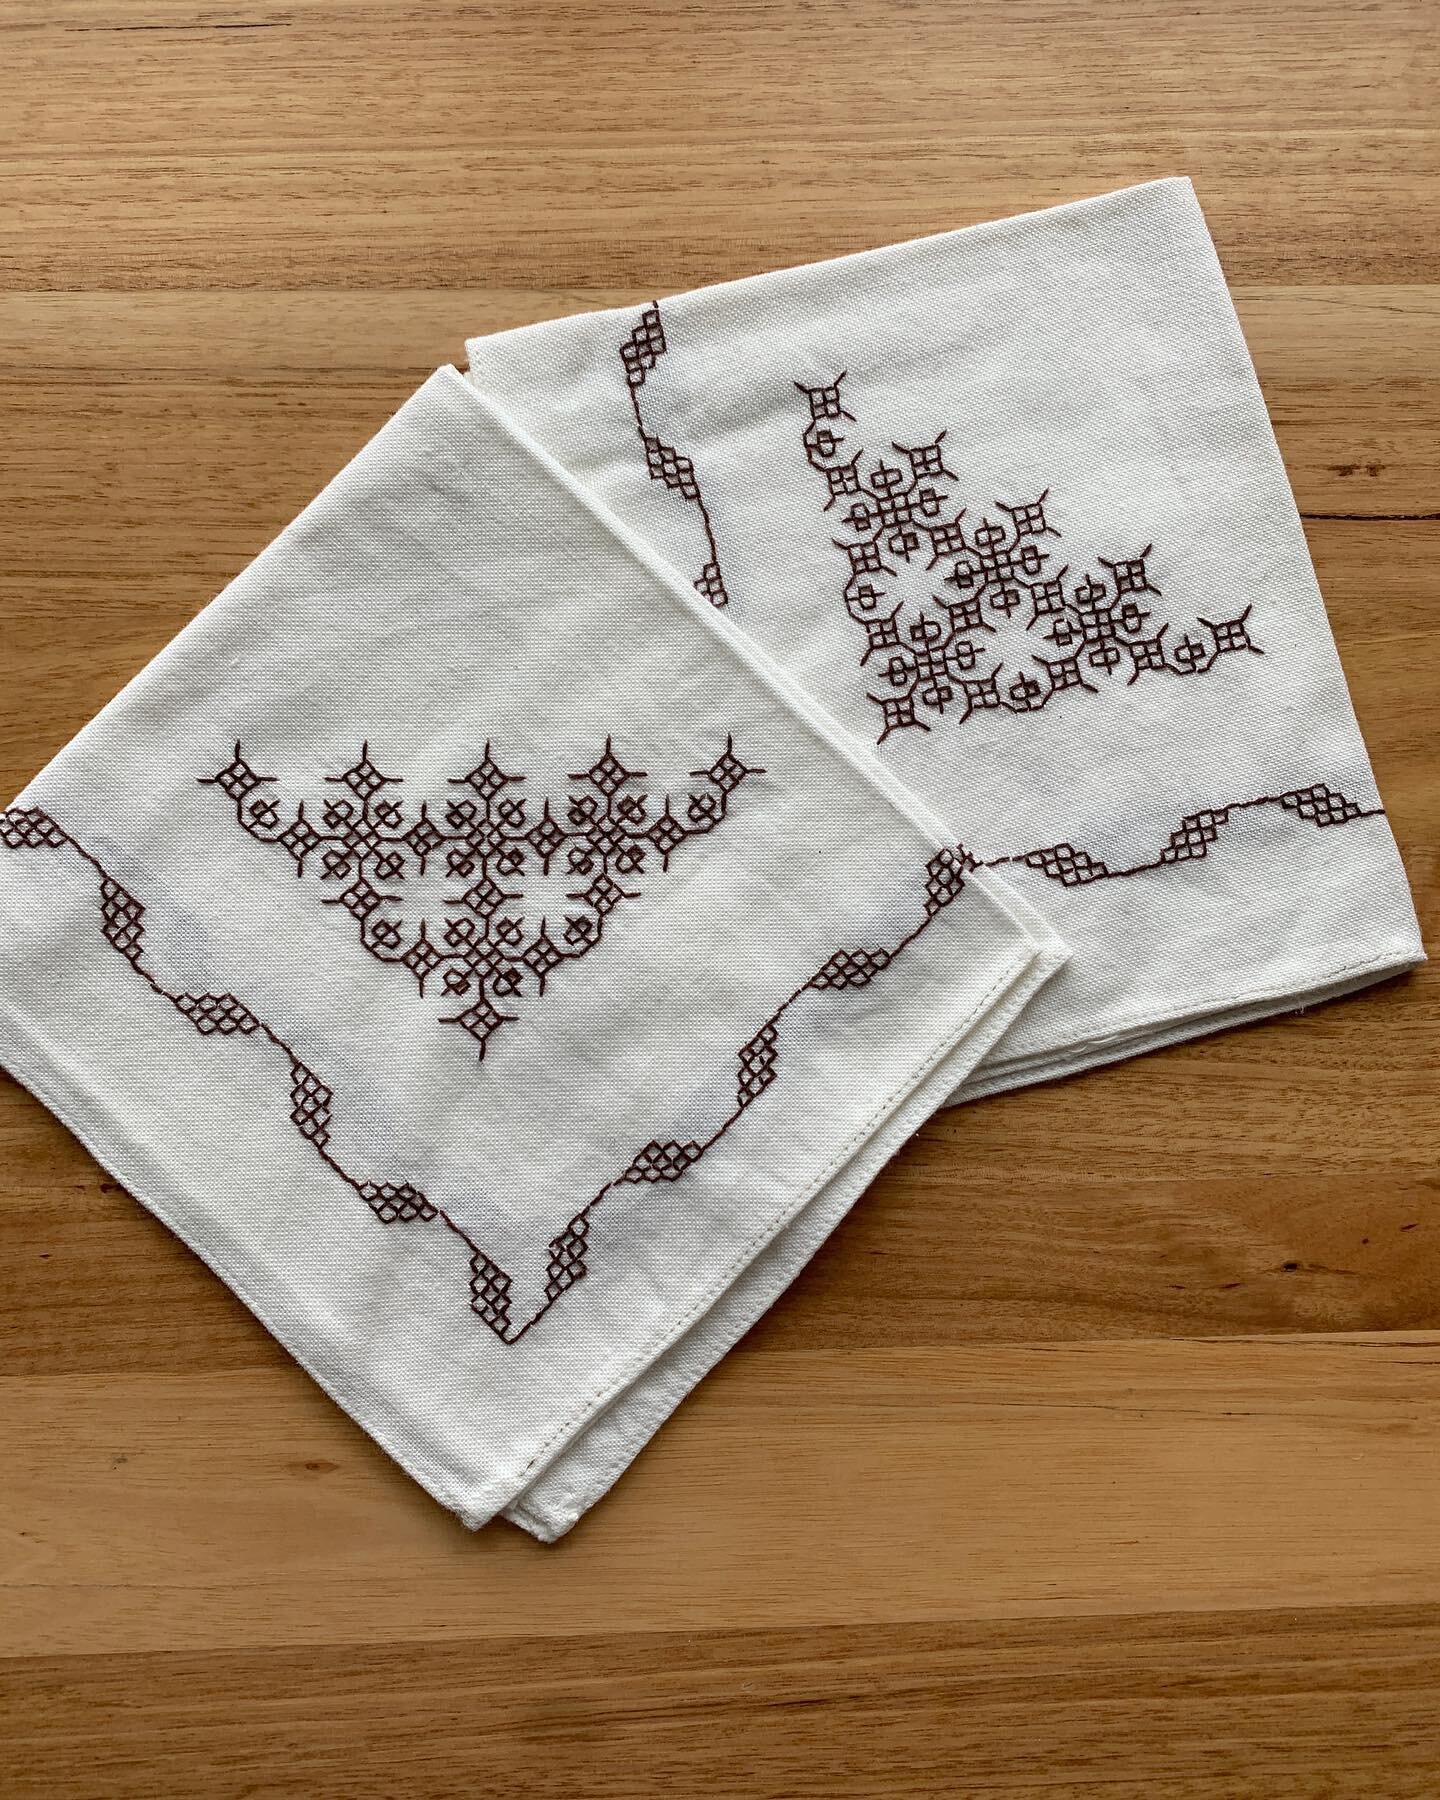 Two vintage napkins that have been embellished with delicate patterning with geometric design. 

$30 for the pair + postage

To purchase an item, please comment below or send us a DM. 

***

We will be posting items to purchase over the next few week